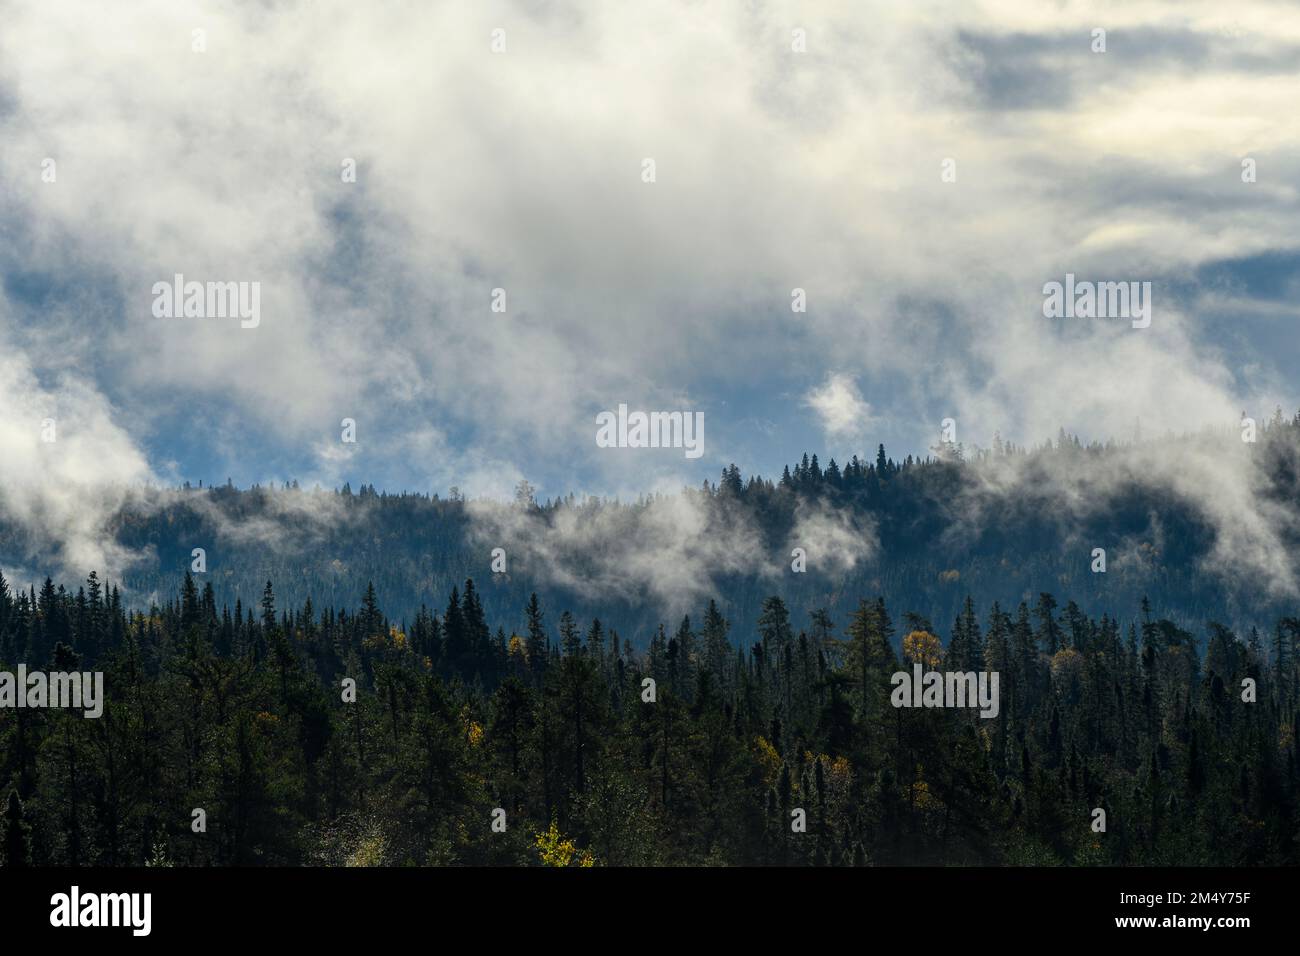 Rising mists over the forest, Lake Superior Provincial Park, Ontario, Canada Stock Photo